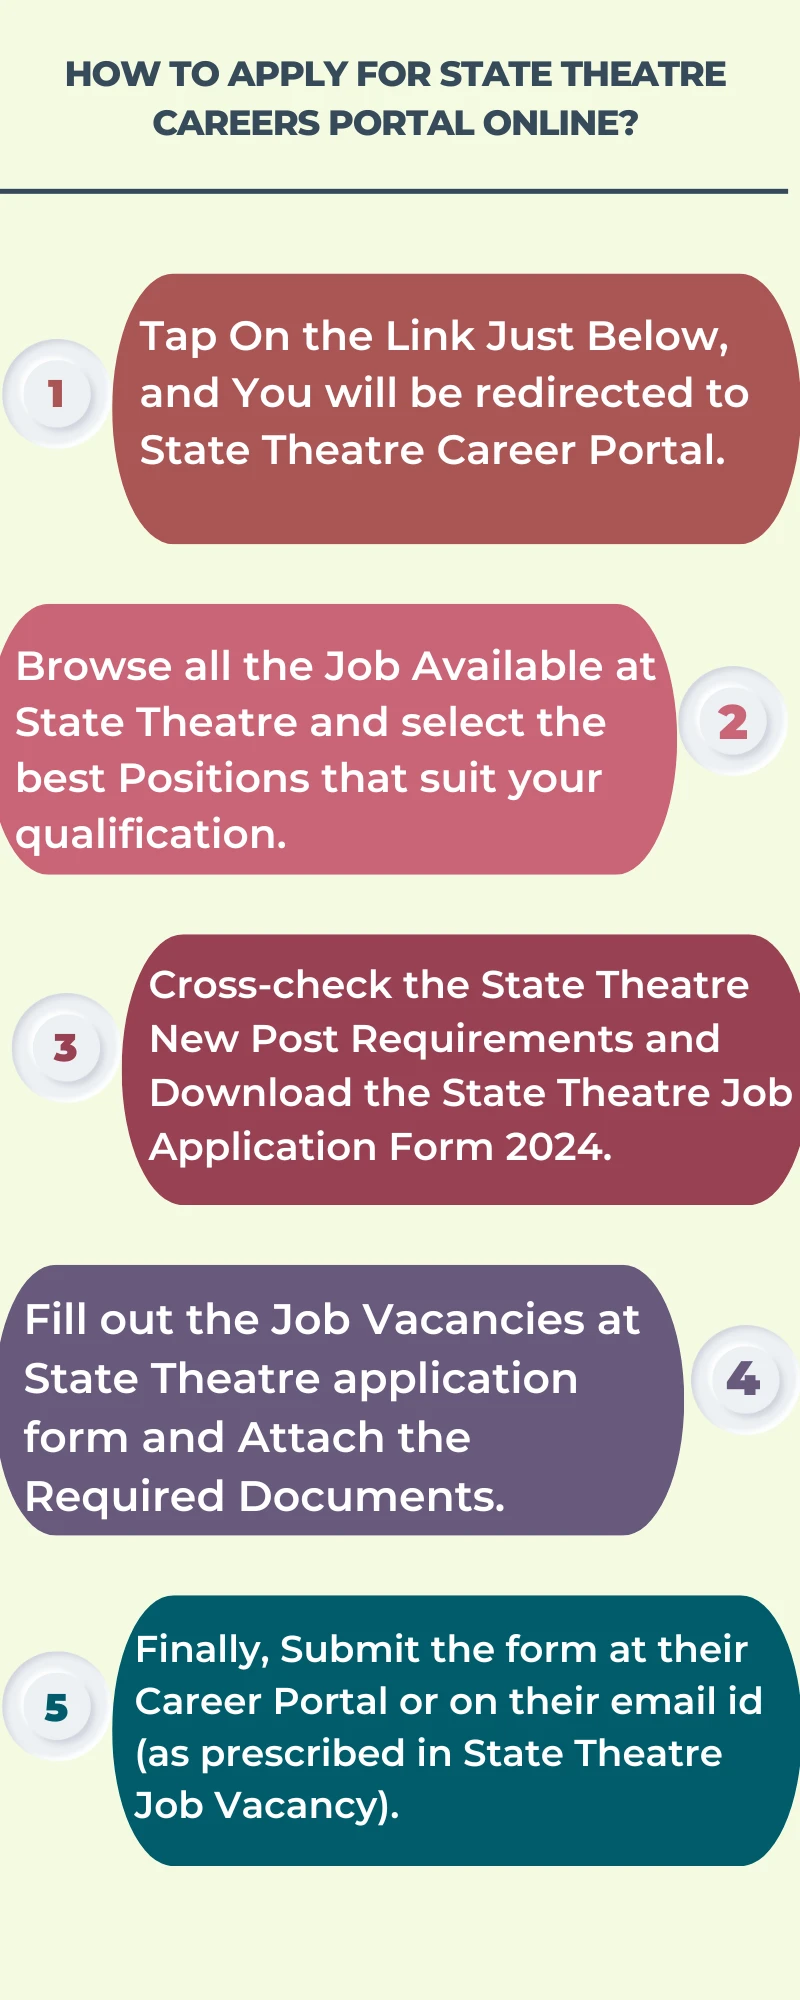 How To Apply for State Theatre Careers Portal Online?